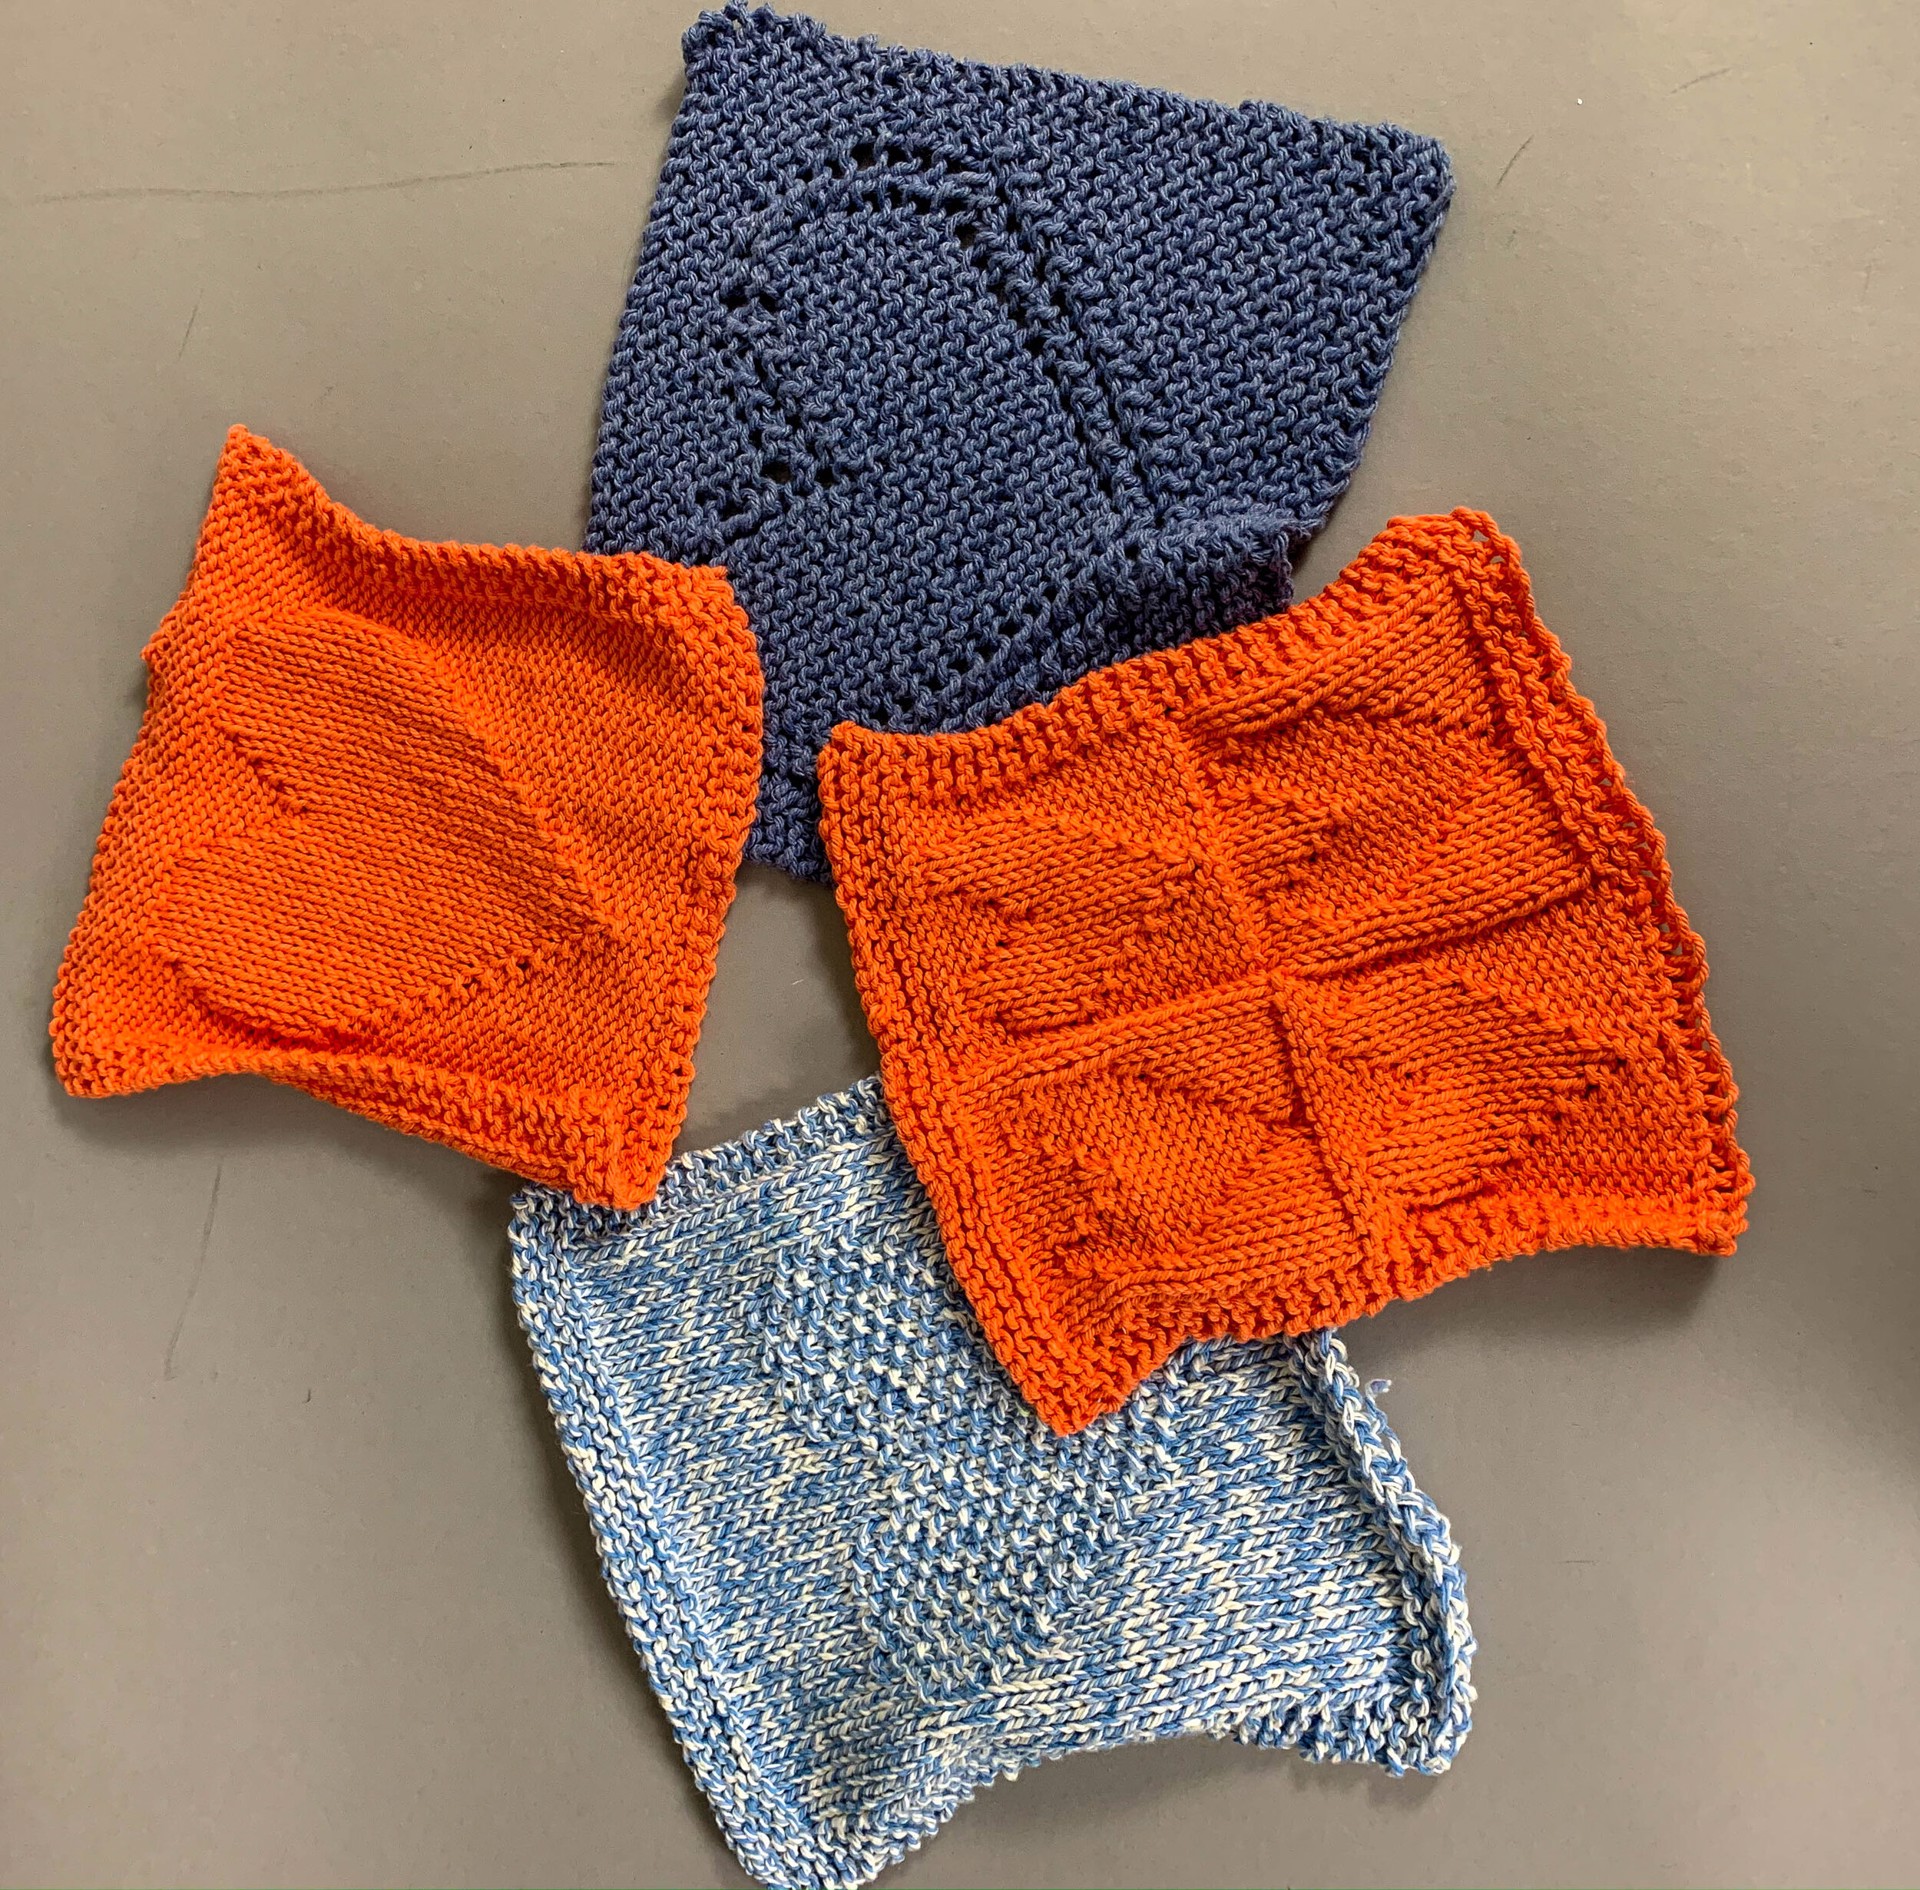 Four, Knit, &amp; Purl hearts by Janice K. Dodson